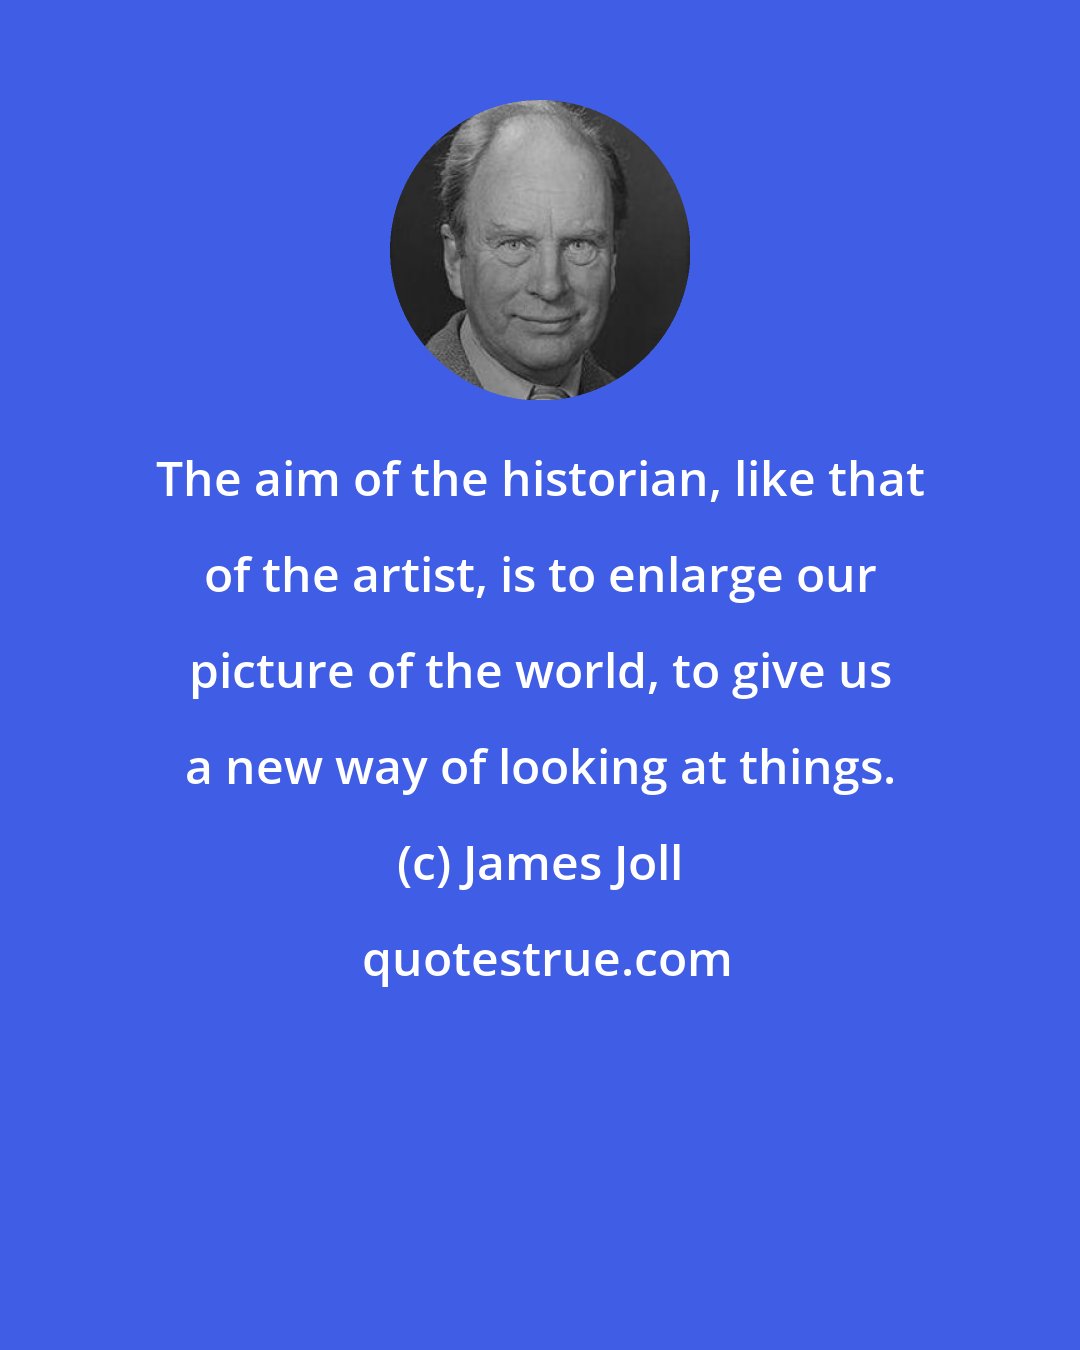 James Joll: The aim of the historian, like that of the artist, is to enlarge our picture of the world, to give us a new way of looking at things.